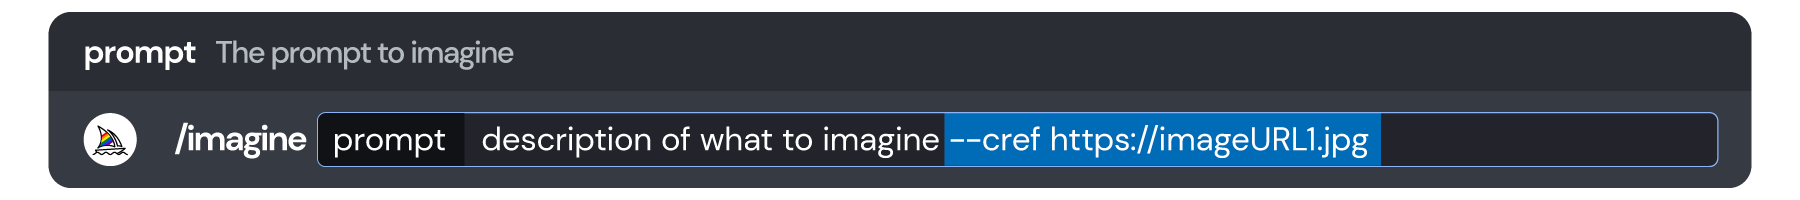 Image of the Discord message send box showing an example /imagine command using --cref style references: '/imagine prompt description of what to imagine --cref https://imageURL1.jpg'